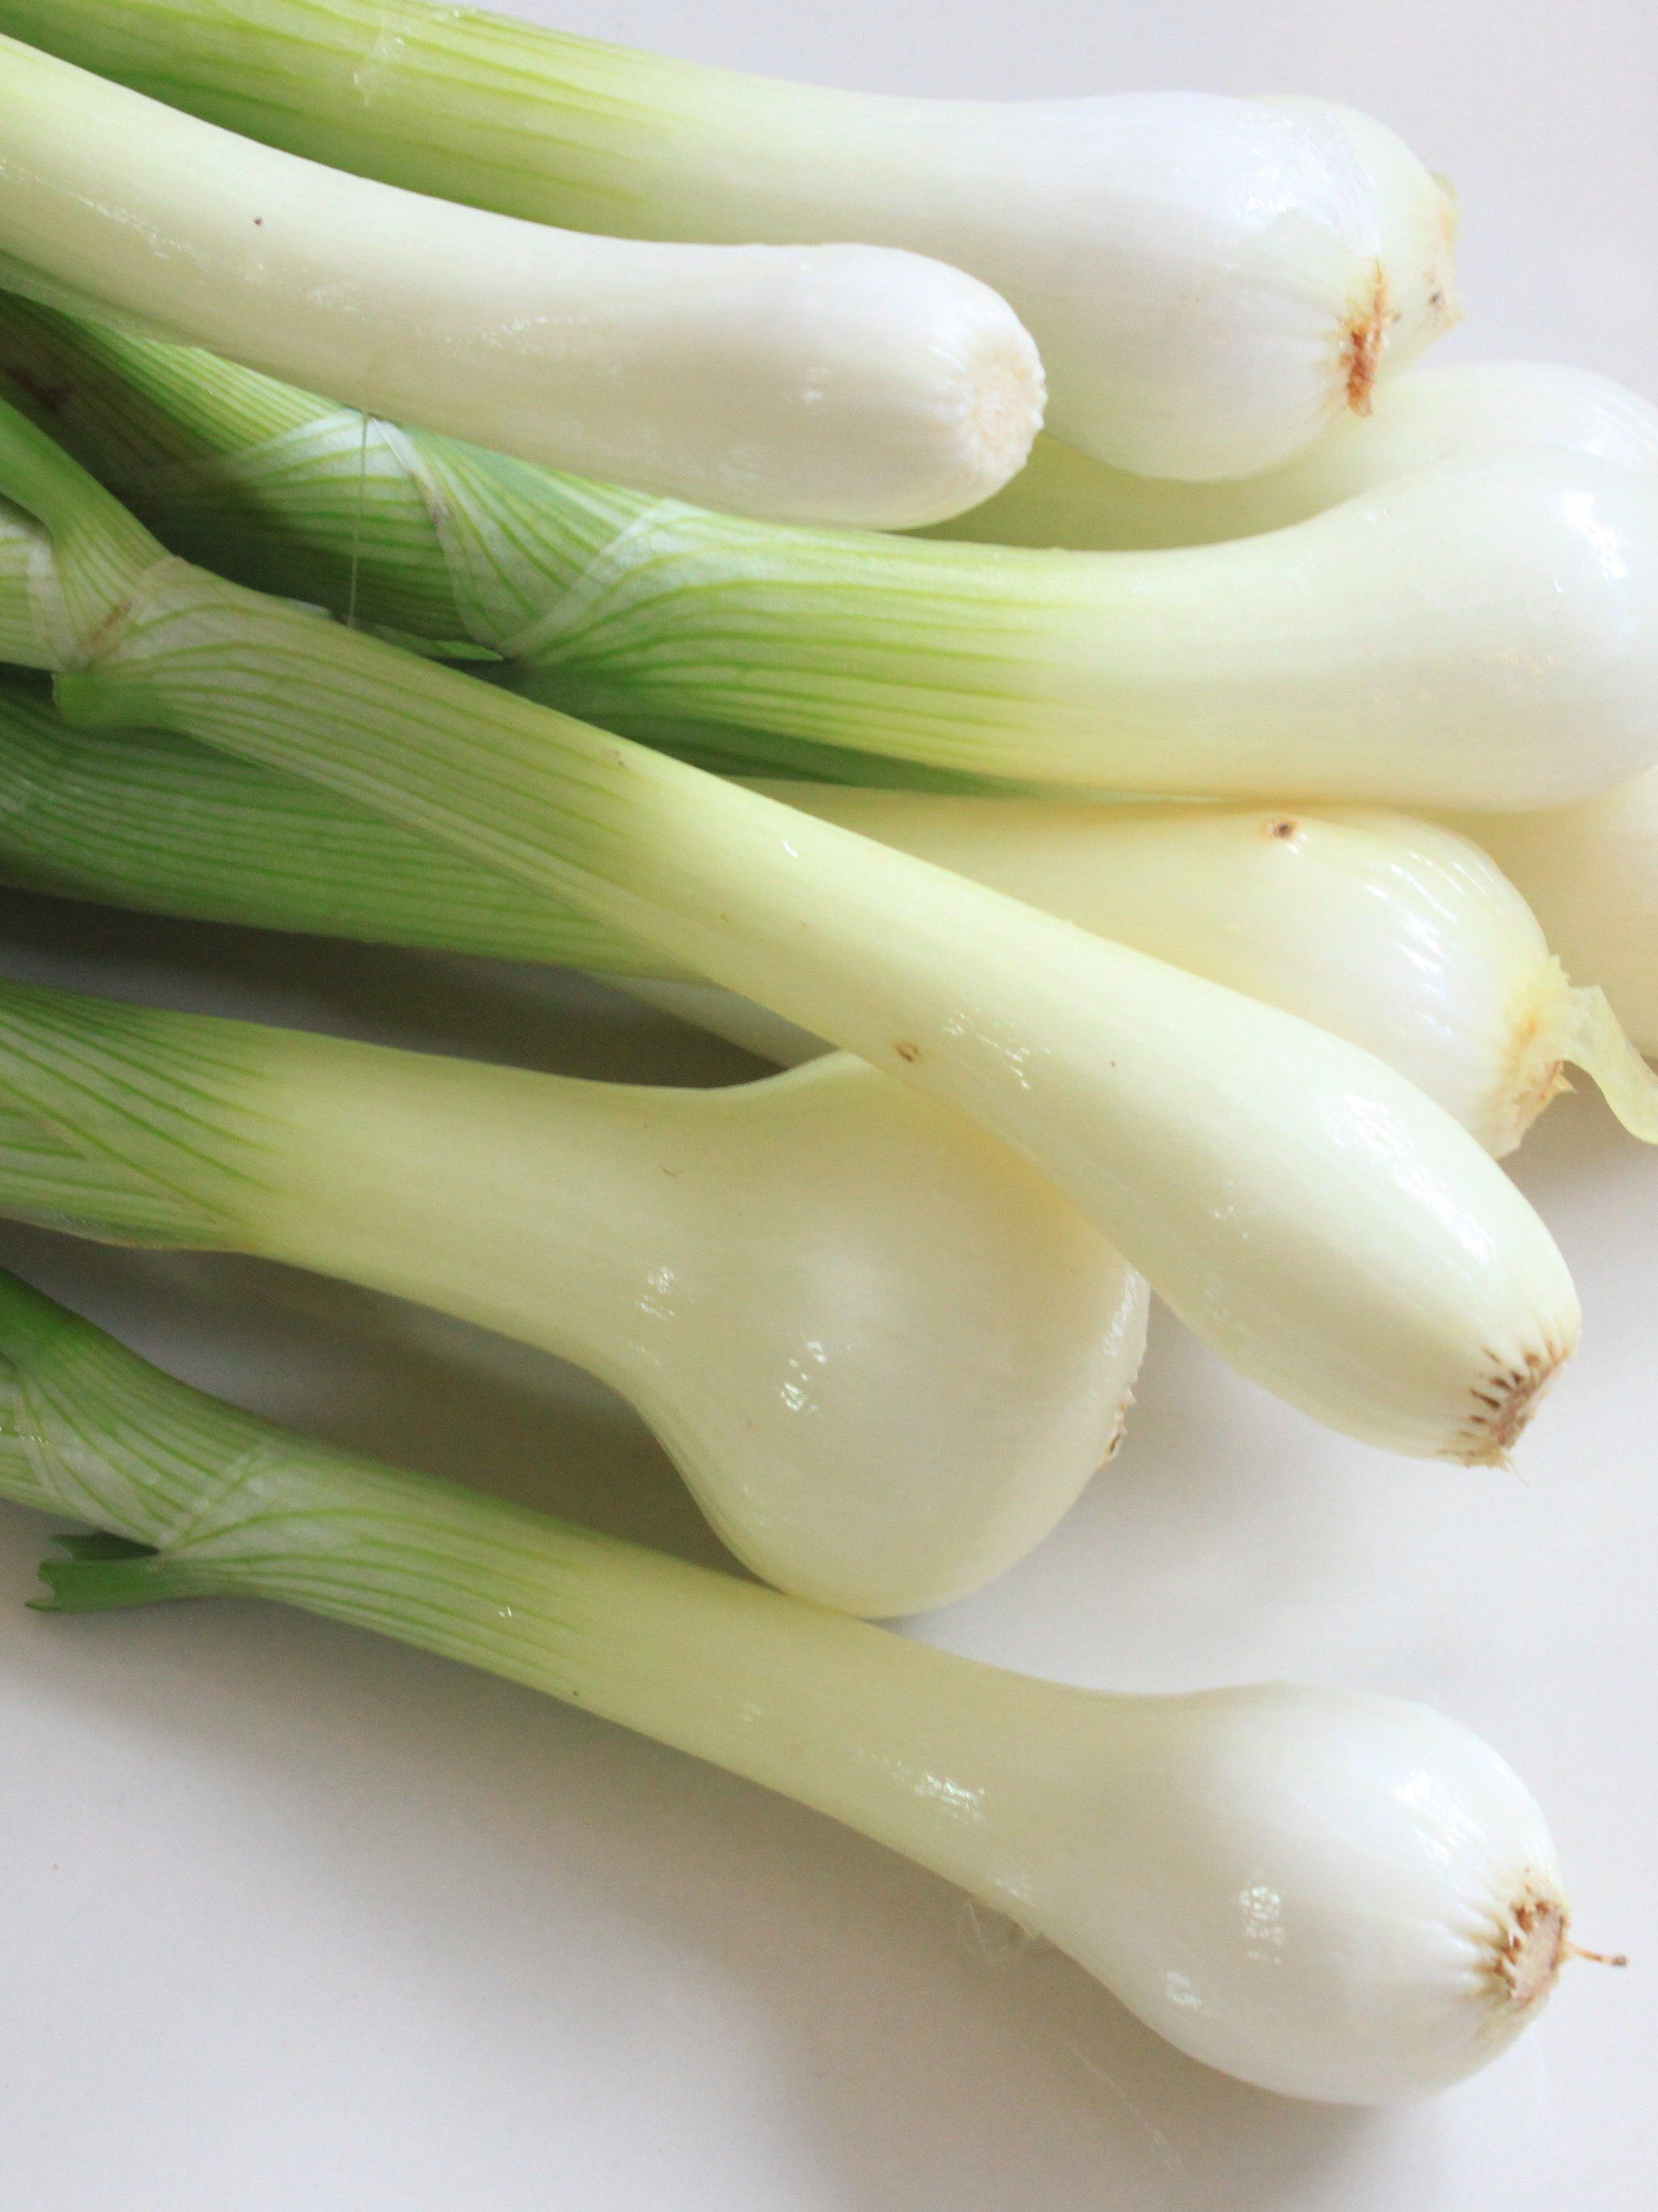 Green Onions Wallpaper, Android & Desktop Background